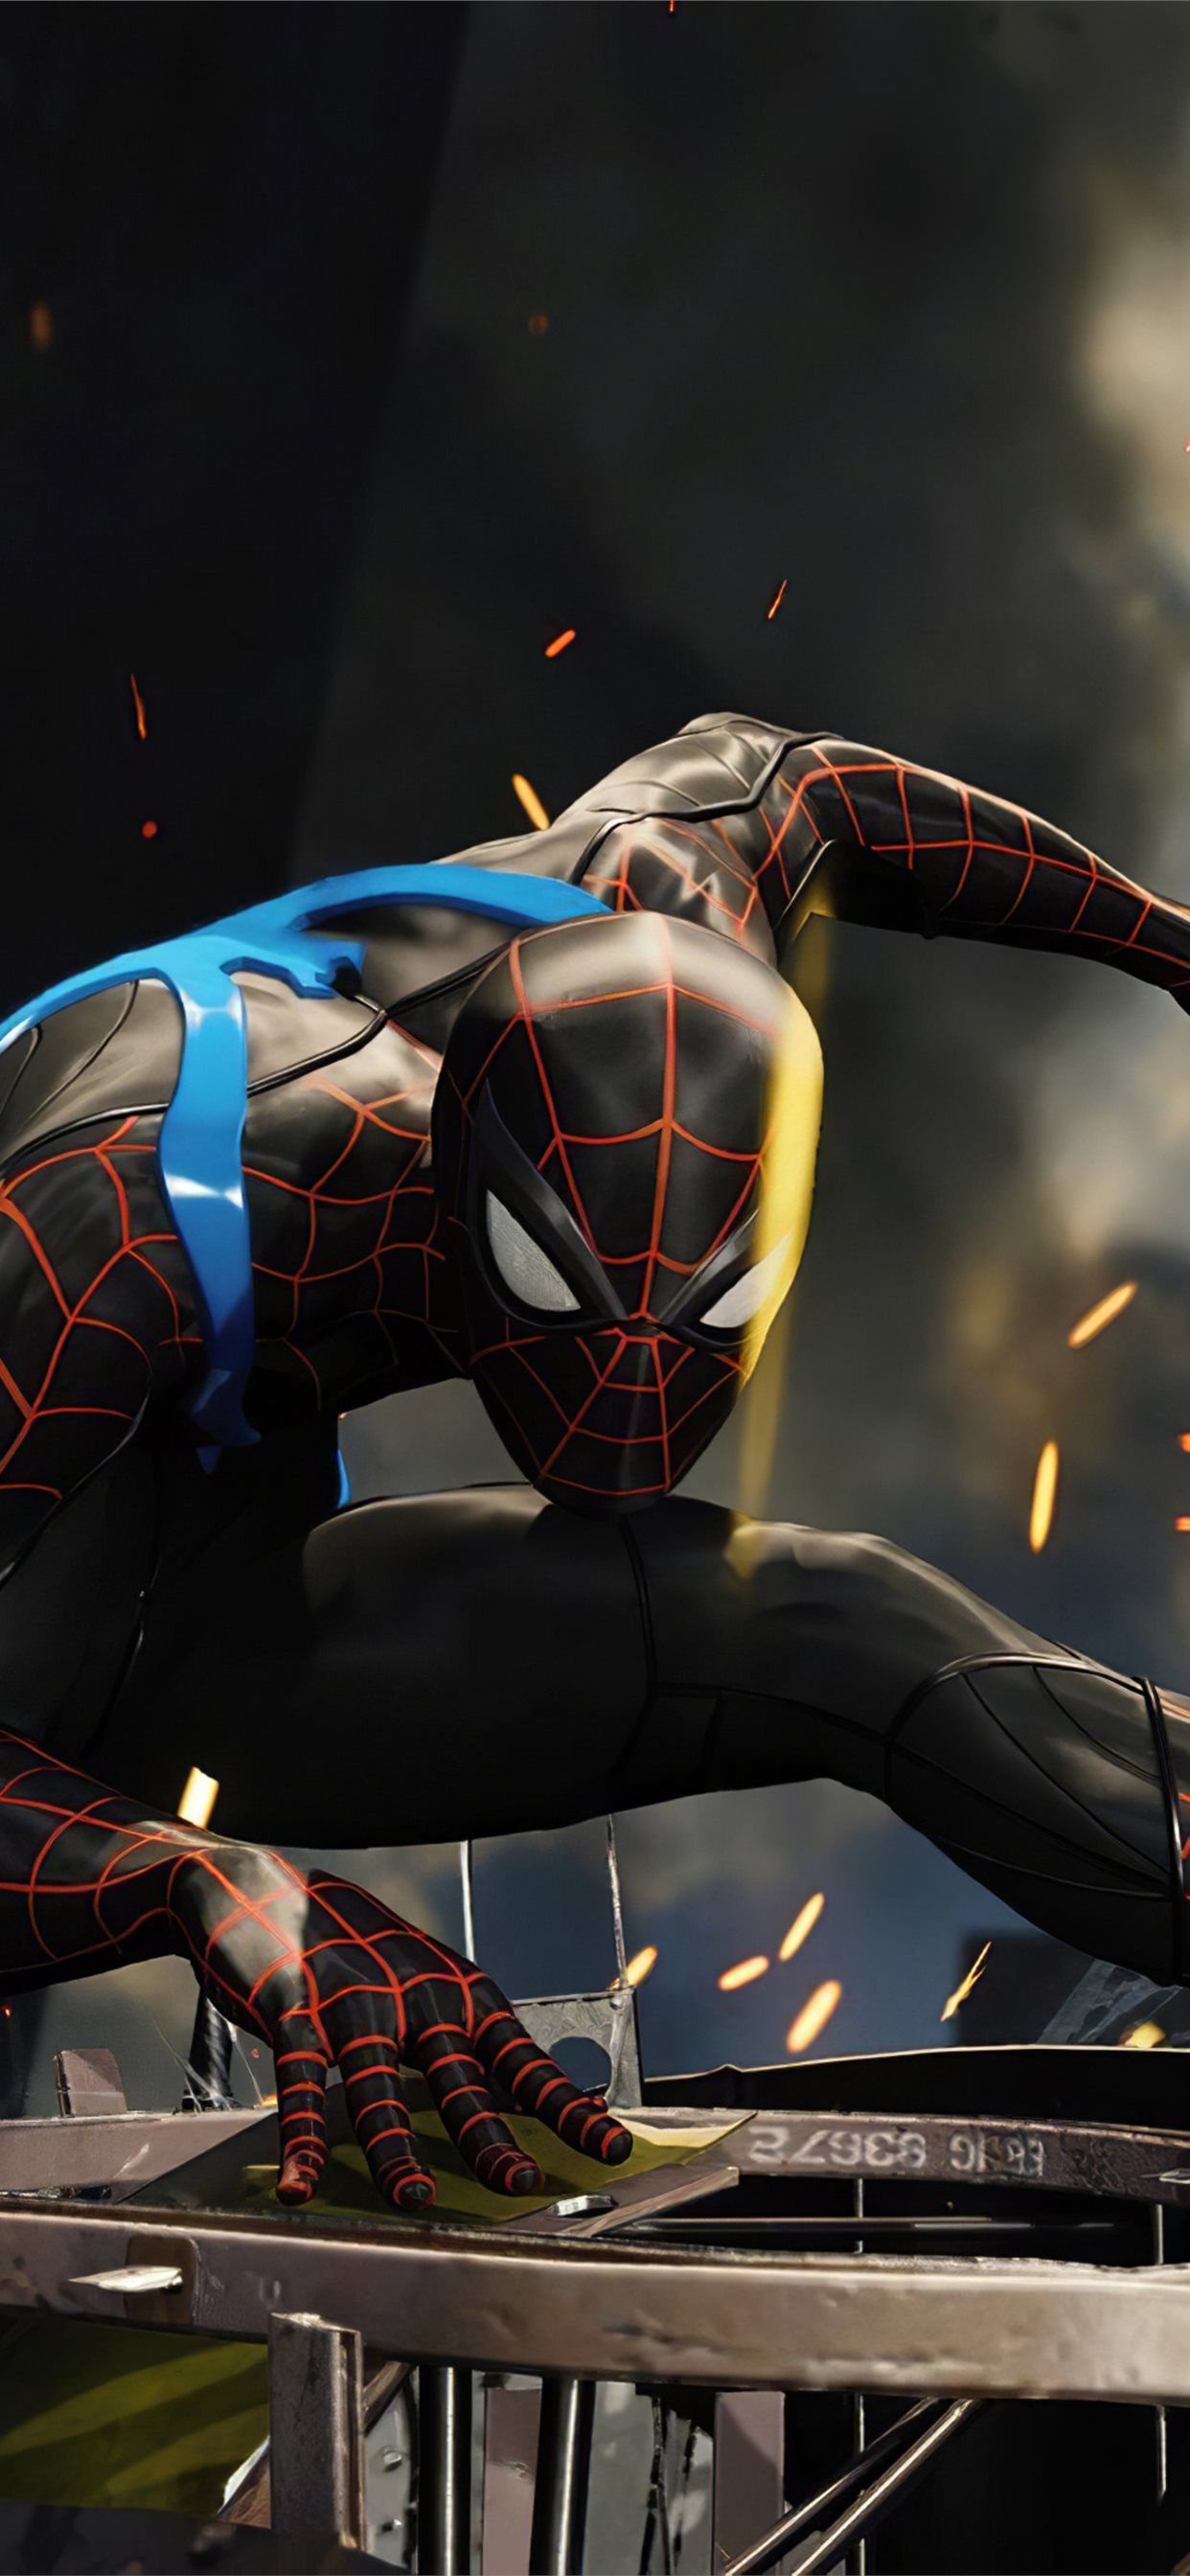 4k spiderman ps4 2020 iPhone X Wallpapers Free Download